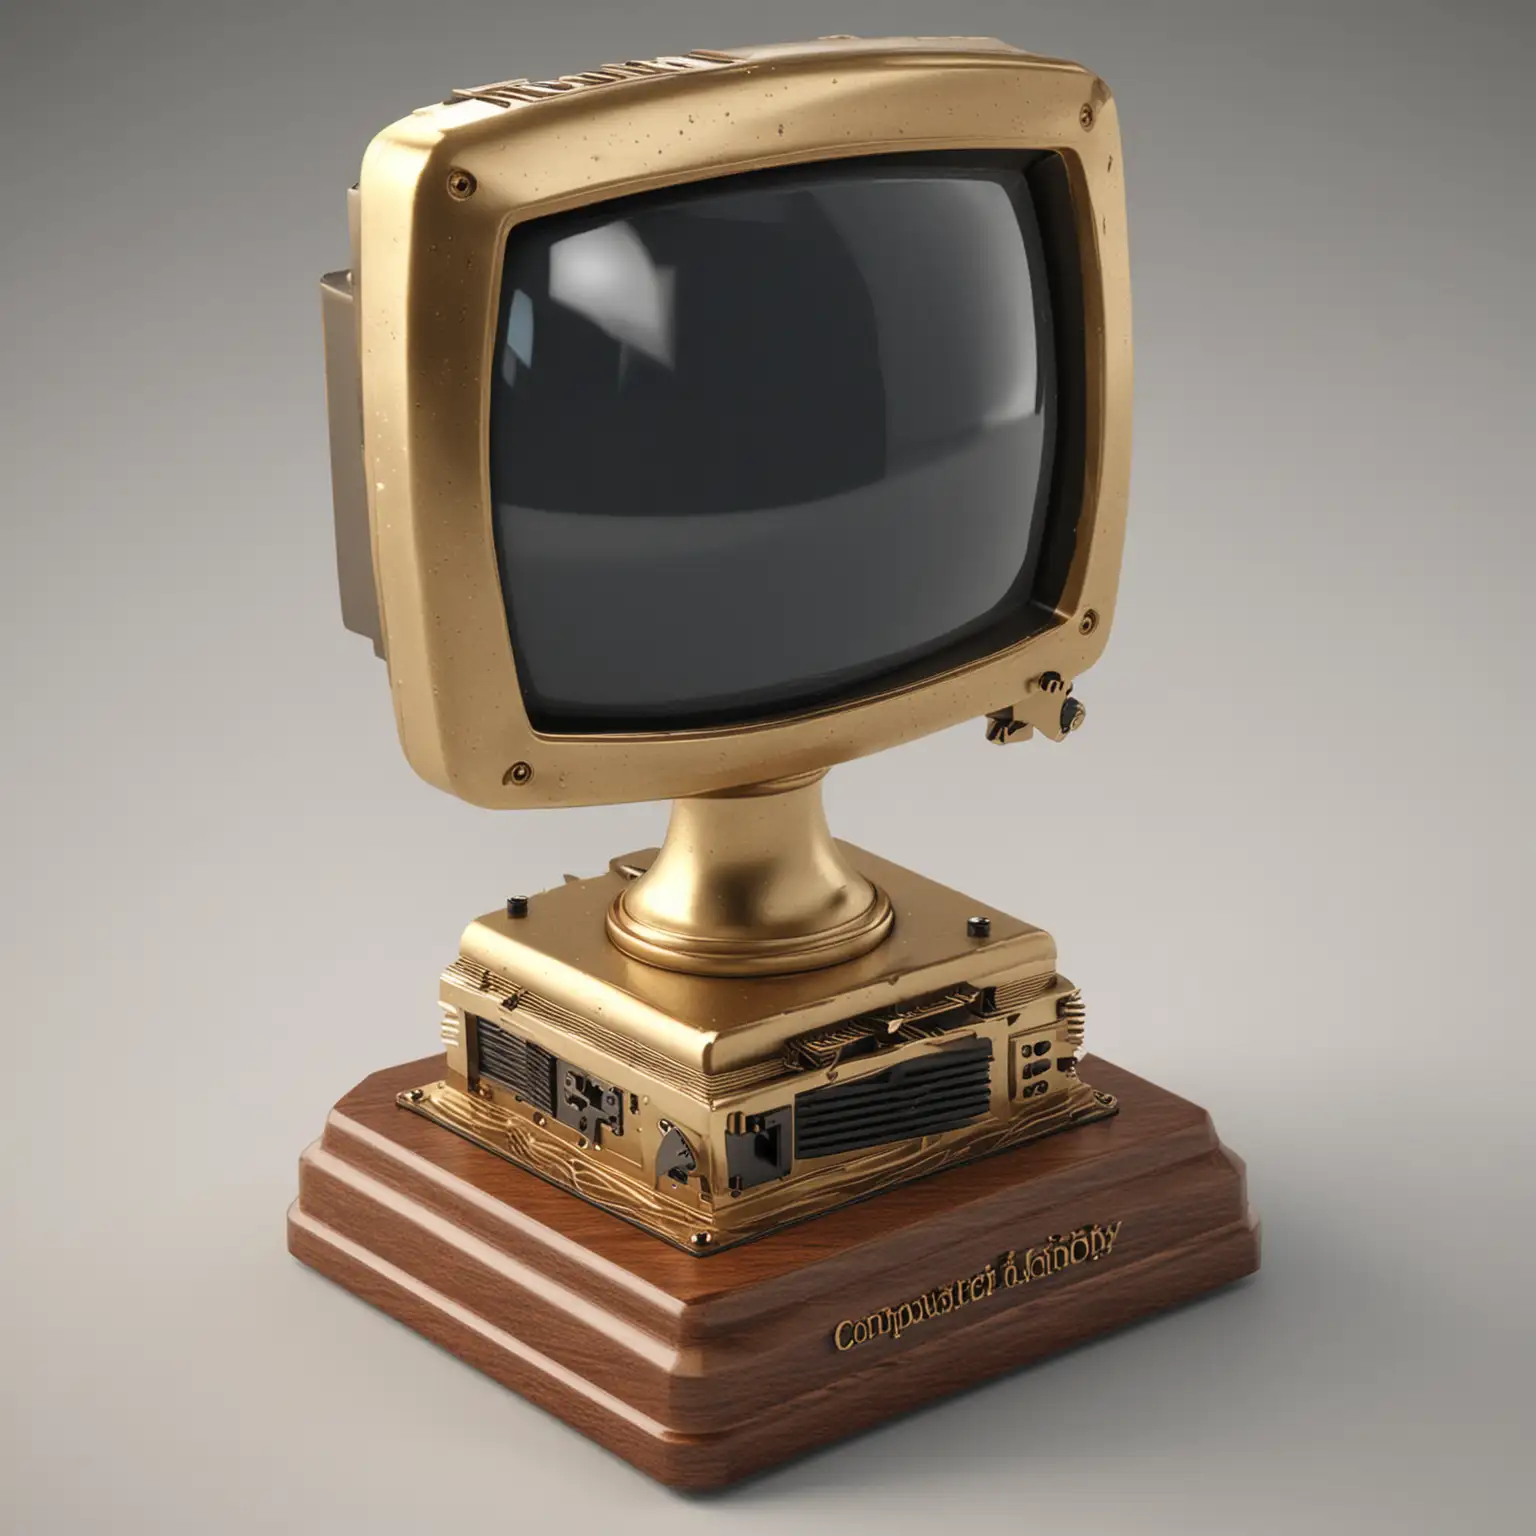 Modern Computer Trophy with Futuristic Design